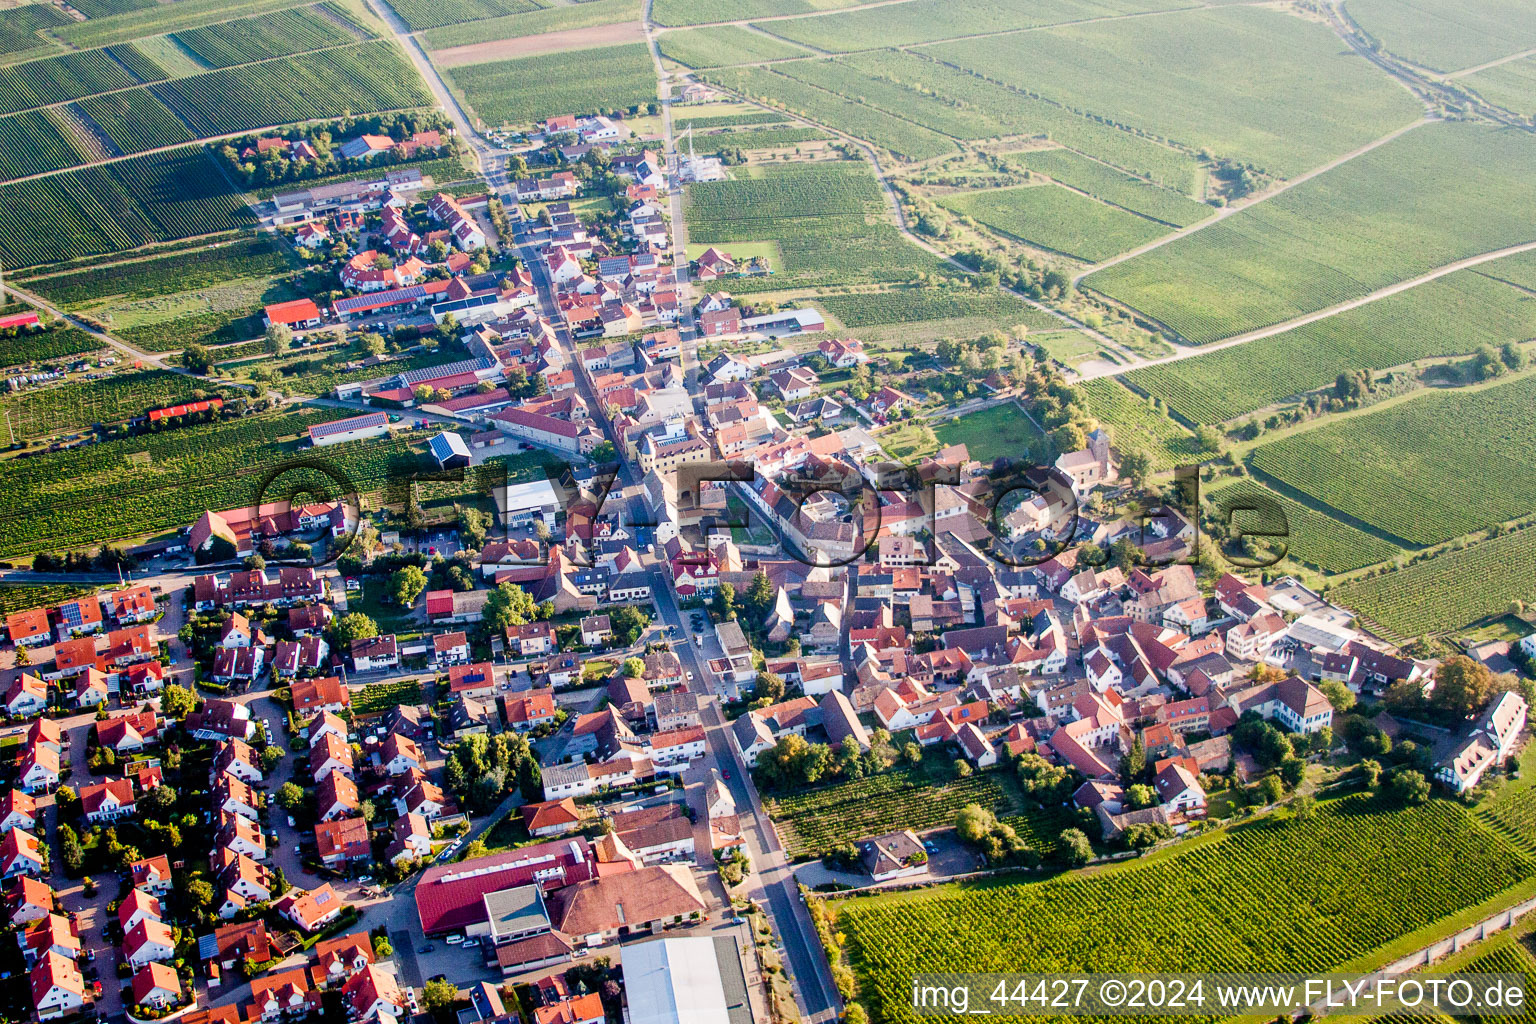 Aerial view of Village - view on the edge of wine yards in Herxheim am Berg in the state Rhineland-Palatinate, Germany